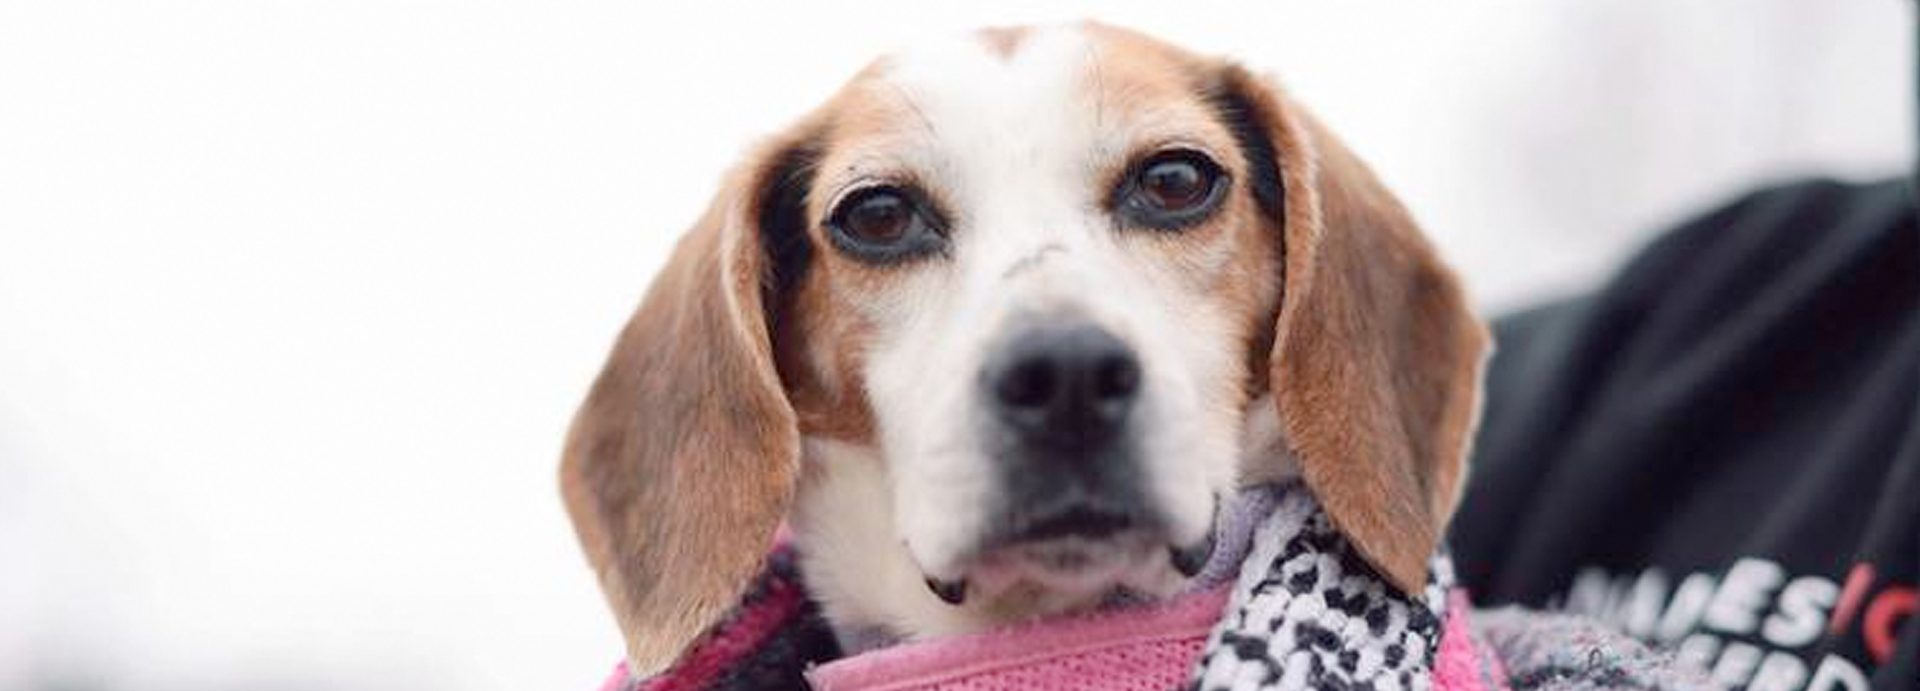 Paralyzed beagle found in Floyd County dump. She might have been lab test animal